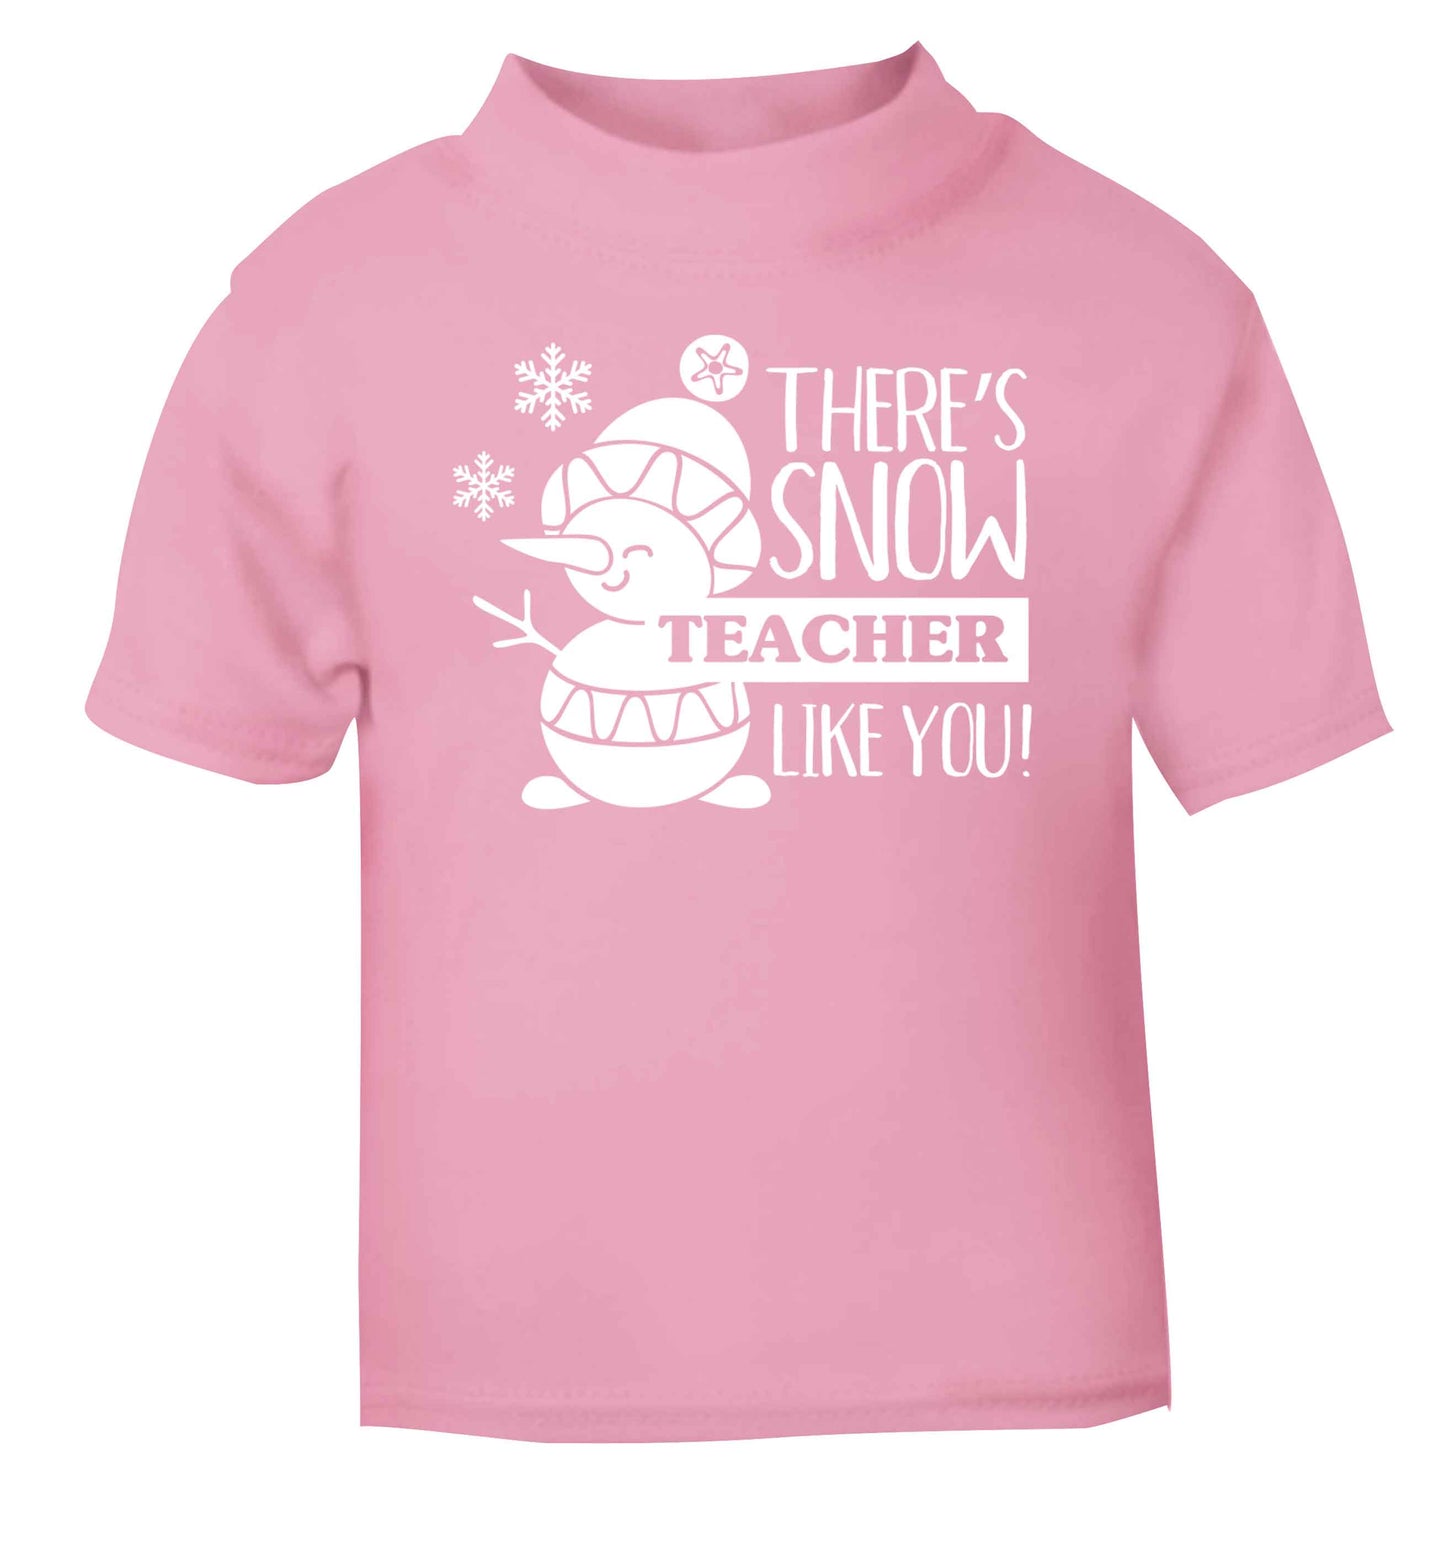 There's snow teacher like you light pink baby toddler Tshirt 2 Years